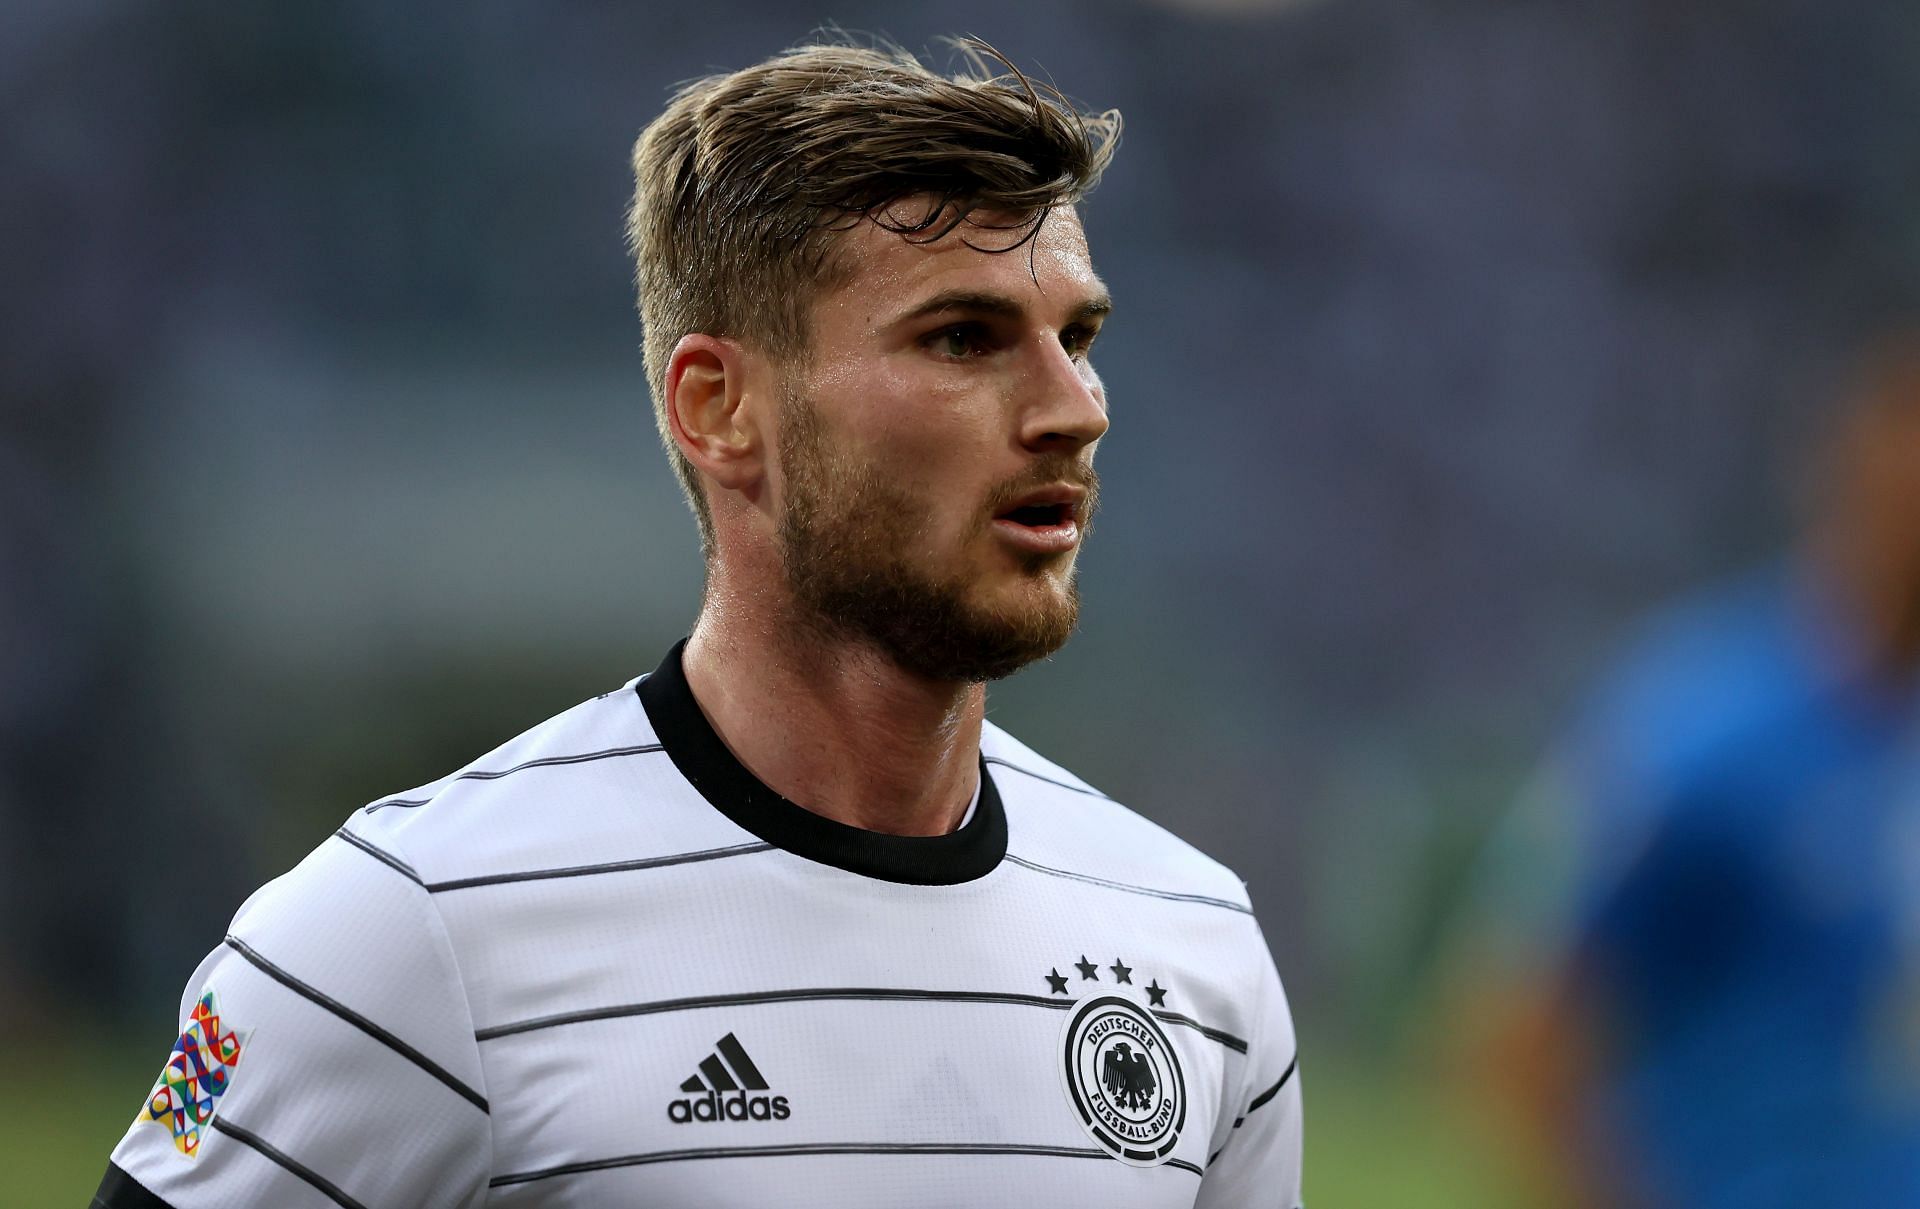 Timo Werner could be on his way out of Chelsea this summer.